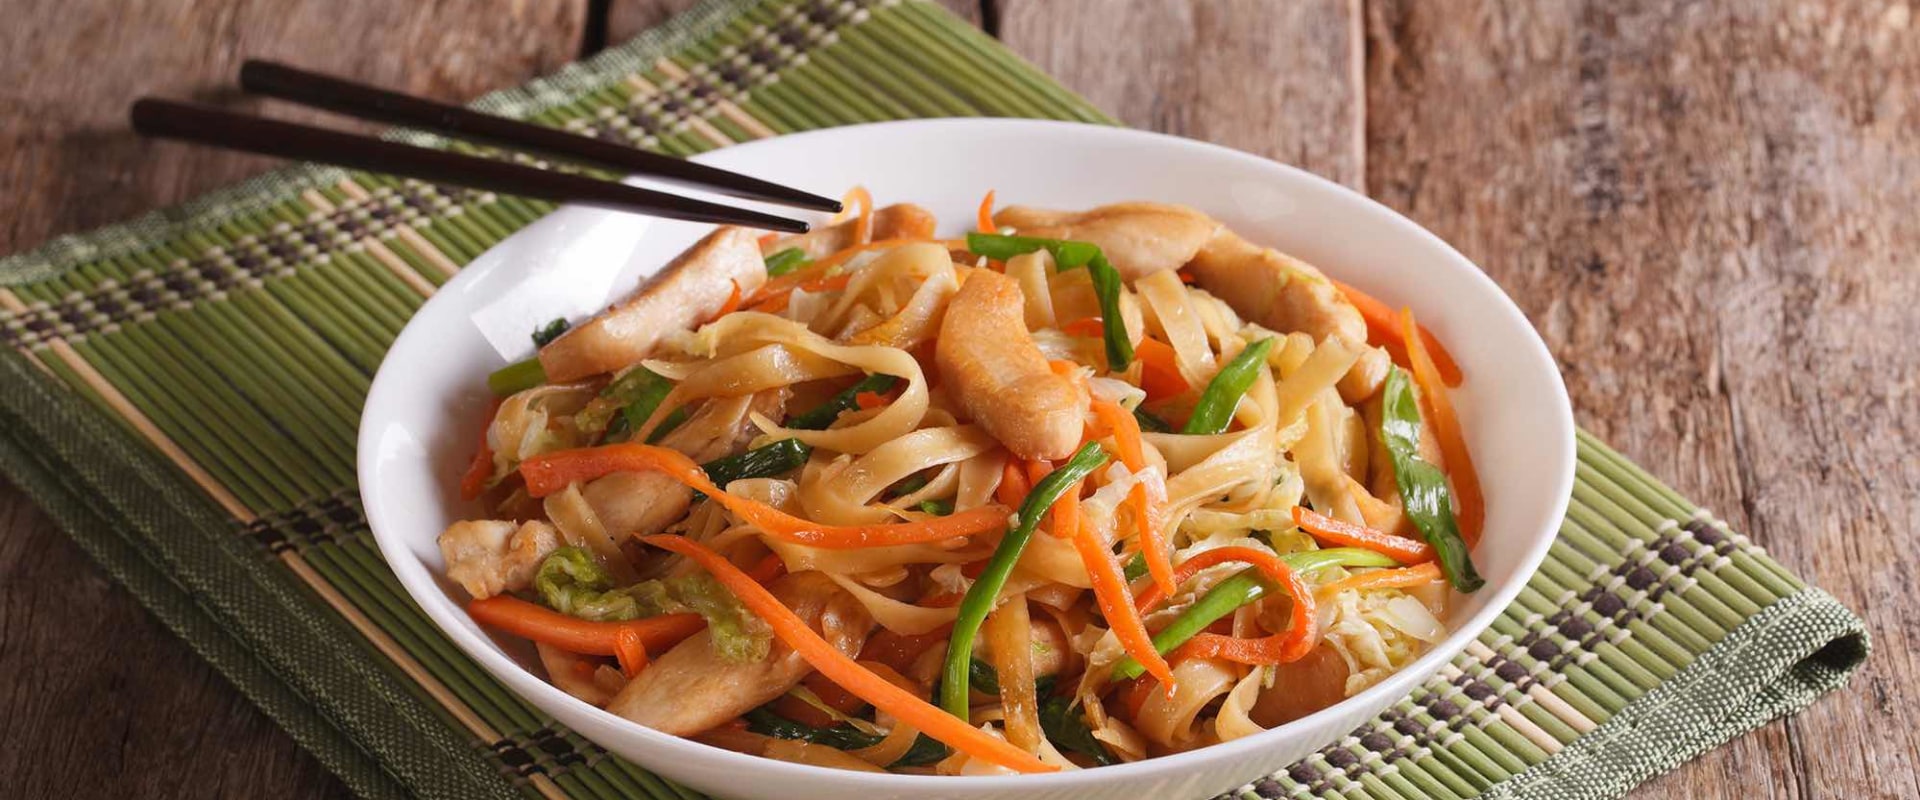 Dried Scallop and Chicken Stir Fry: A Delicious and Versatile Chinese Dish